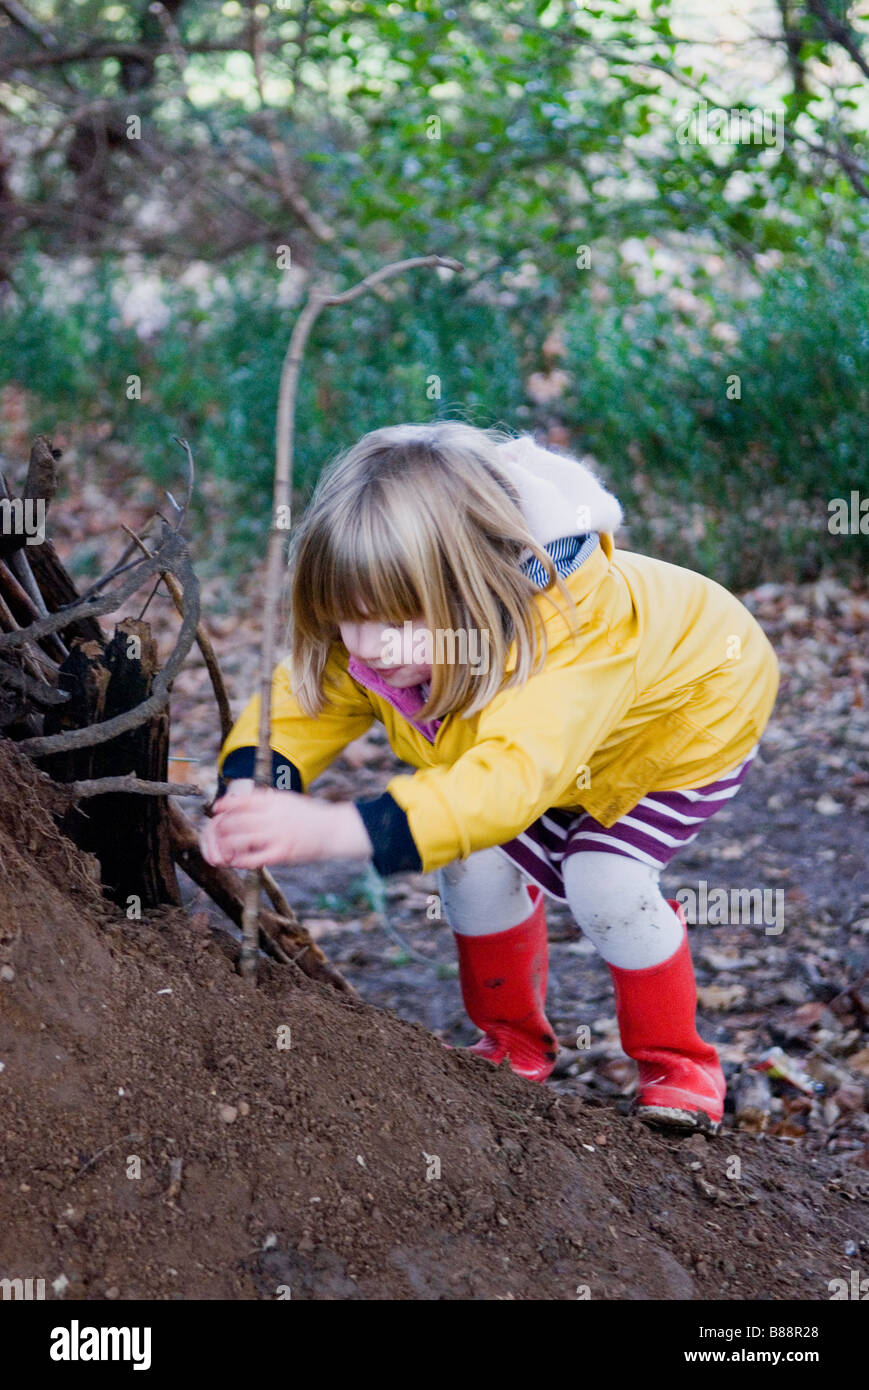 A young girl building a camp from sticks in the woods Stock Photo